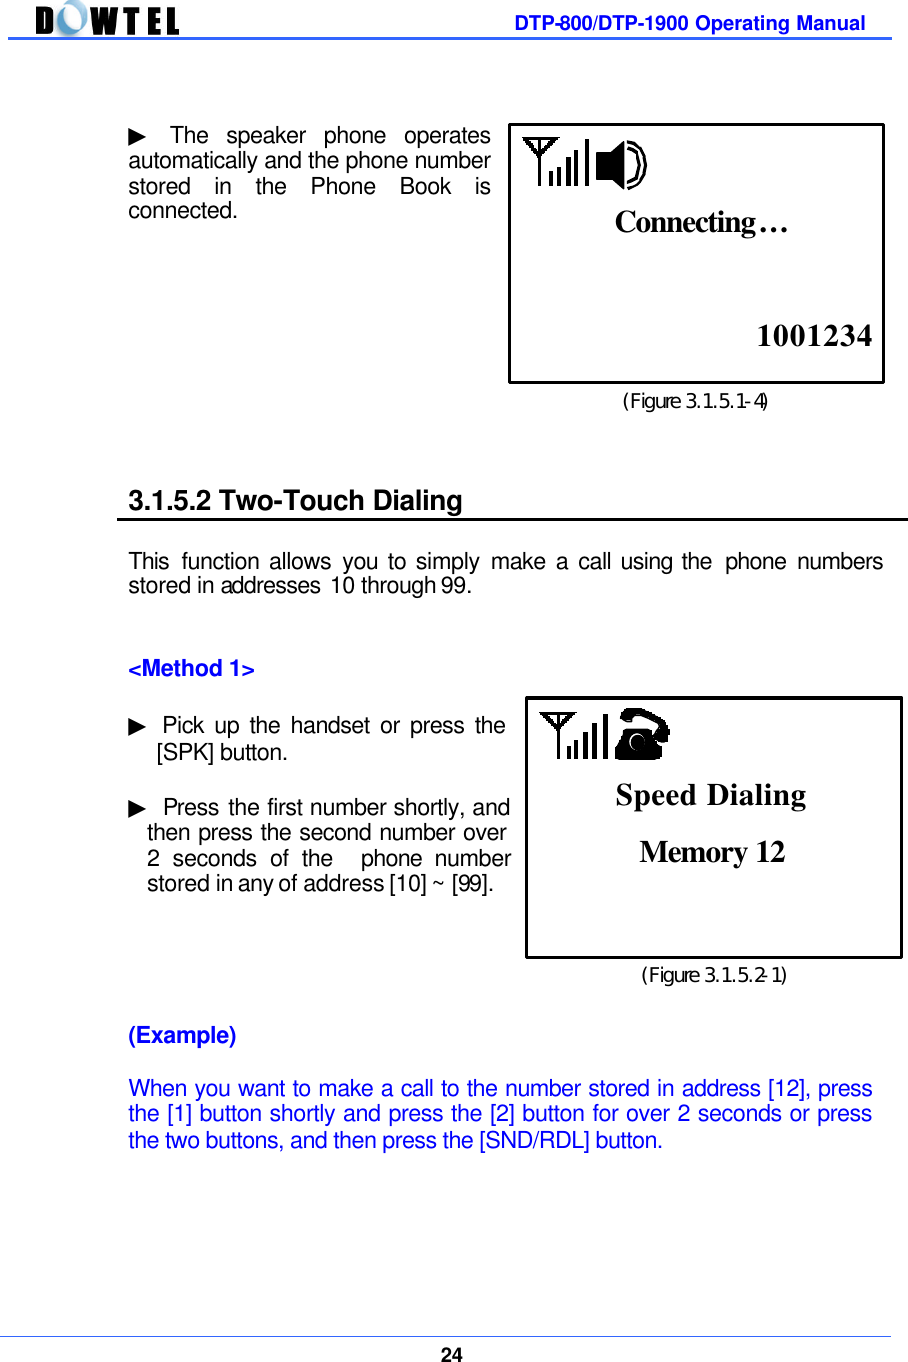         DTP-800/DTP-1900 Operating Manual    24   ▶ The speaker phone operates  automatically and the phone number stored in the Phone Book is connected.            3.1.5.2 Two-Touch Dialing  This function allows you to simply make a call using the  phone numbers stored in addresses 10 through 99.   &lt;Method 1&gt;  ▶ Pick up the handset or press the [SPK] button.  ▶ Press the first number shortly, and then press the second number over 2 seconds of the    phone number stored in any of address [10] ~ [99].      (Example)  When you want to make a call to the number stored in address [12], press the [1] button shortly and press the [2] button for over 2 seconds or press the two buttons, and then press the [SND/RDL] button.       (Figure 3.1.5.2-1) Memory 12  Speed Dialing (Figure 3.1.5.1-4)  1001234 Connecting… 